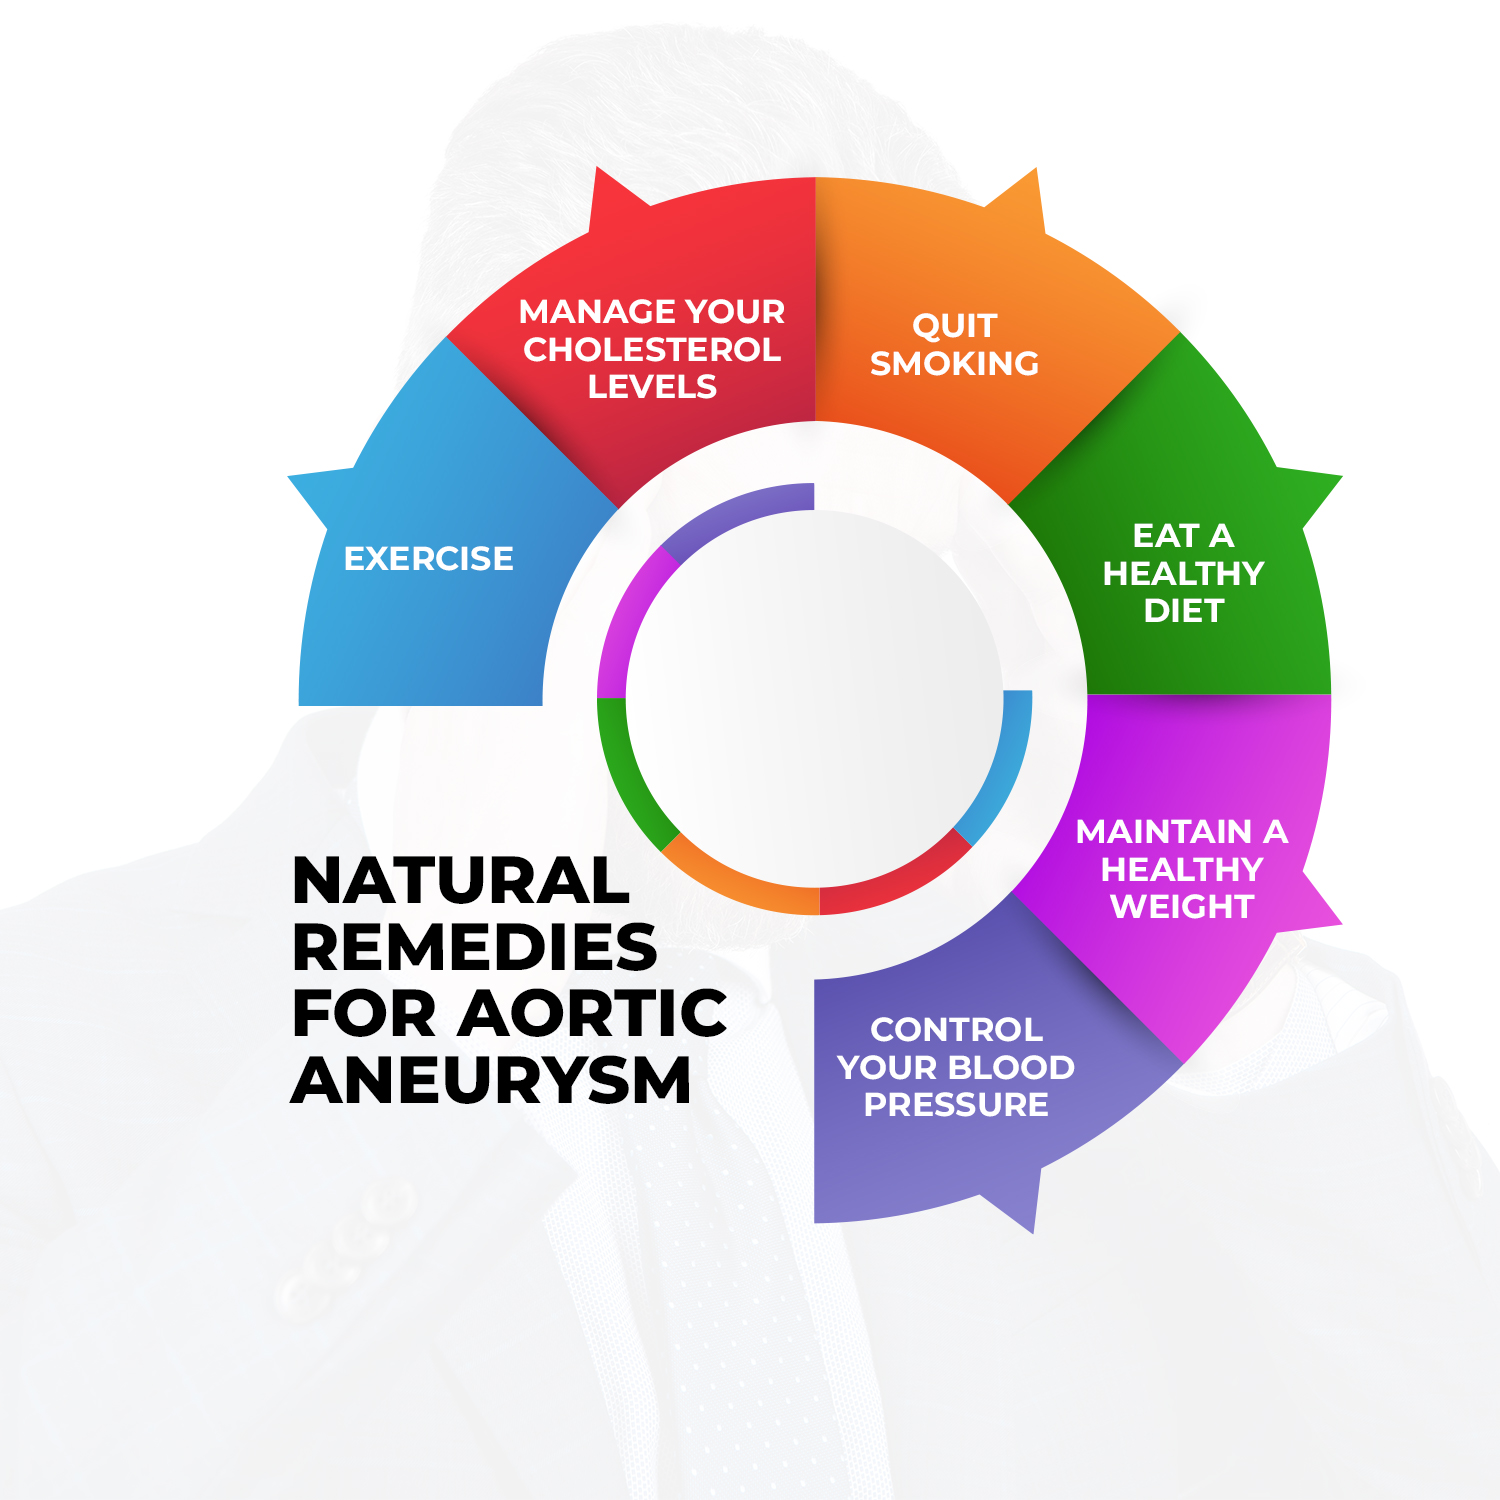 6 Powerful Natural Remedies For Aortic Aneurysm